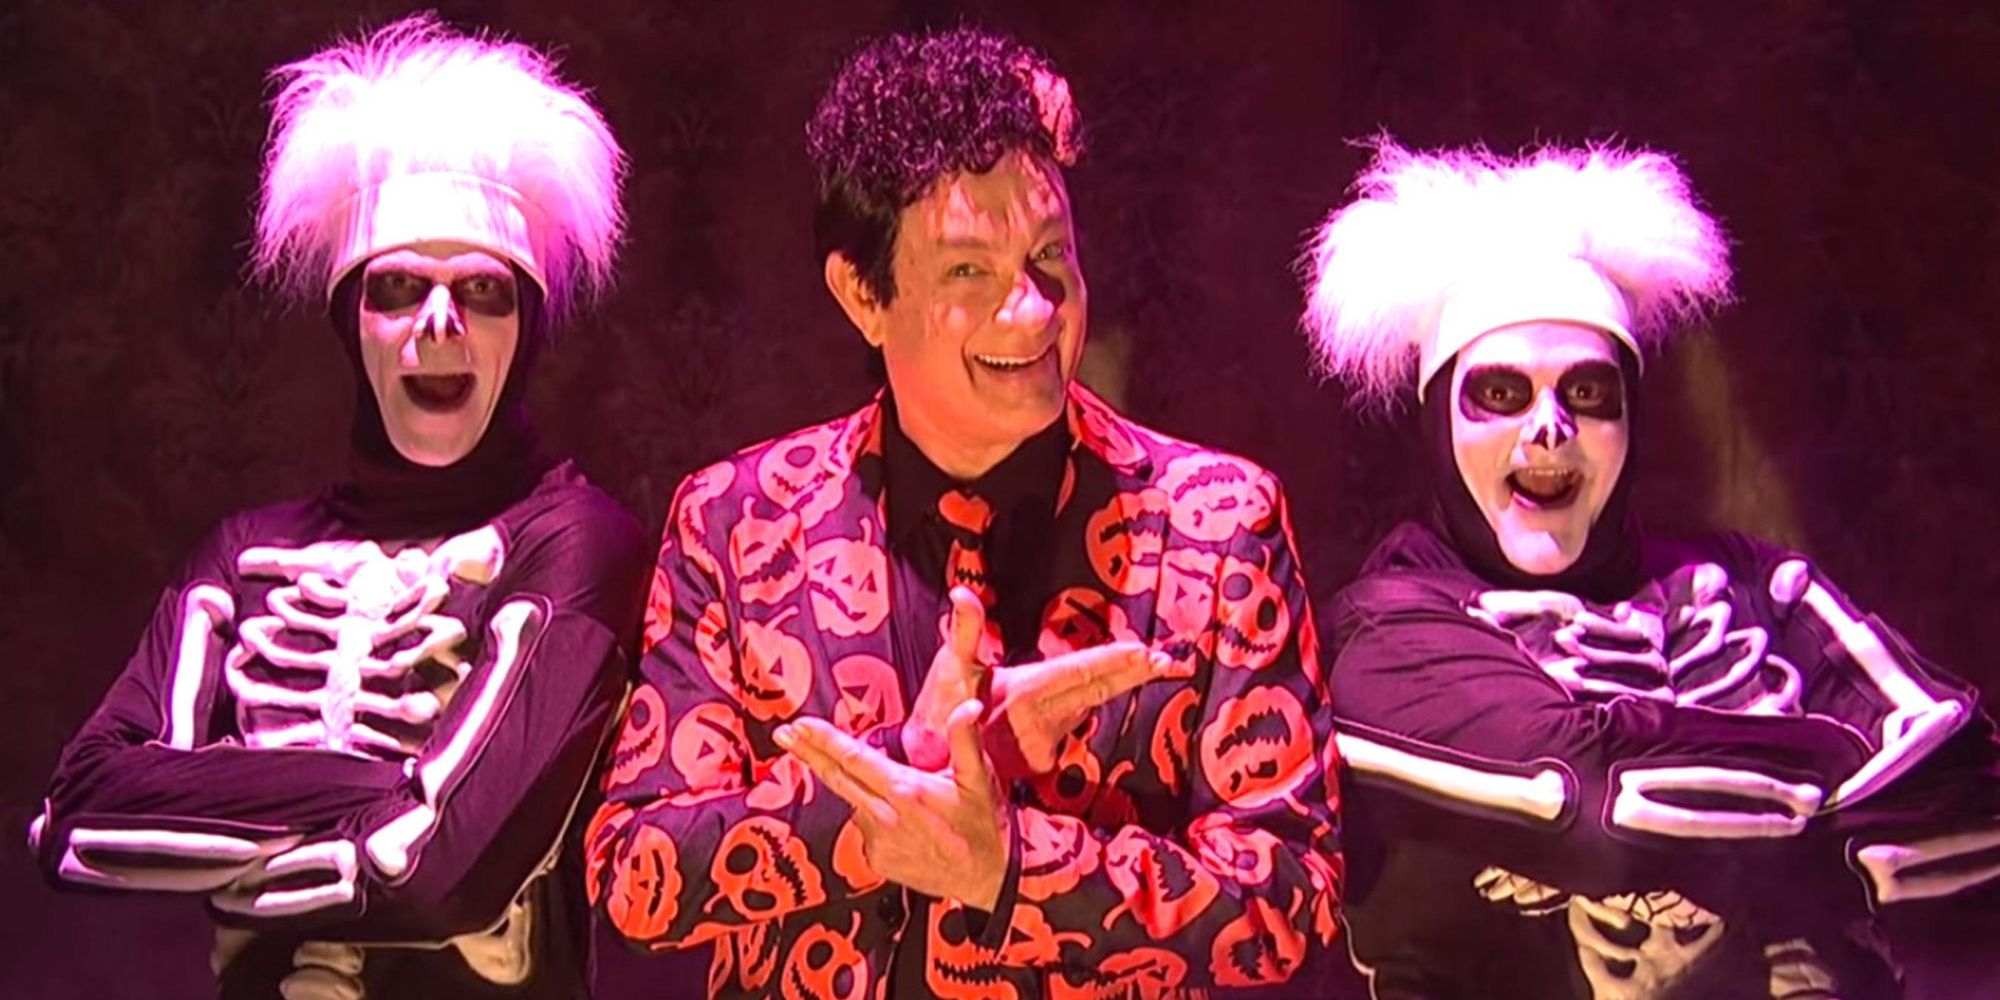 Tom Hanks as David S. Pumpkins, standing with Left Skeleton (Mikey Day) and Fat Skeleton (Bobby Moynihan)